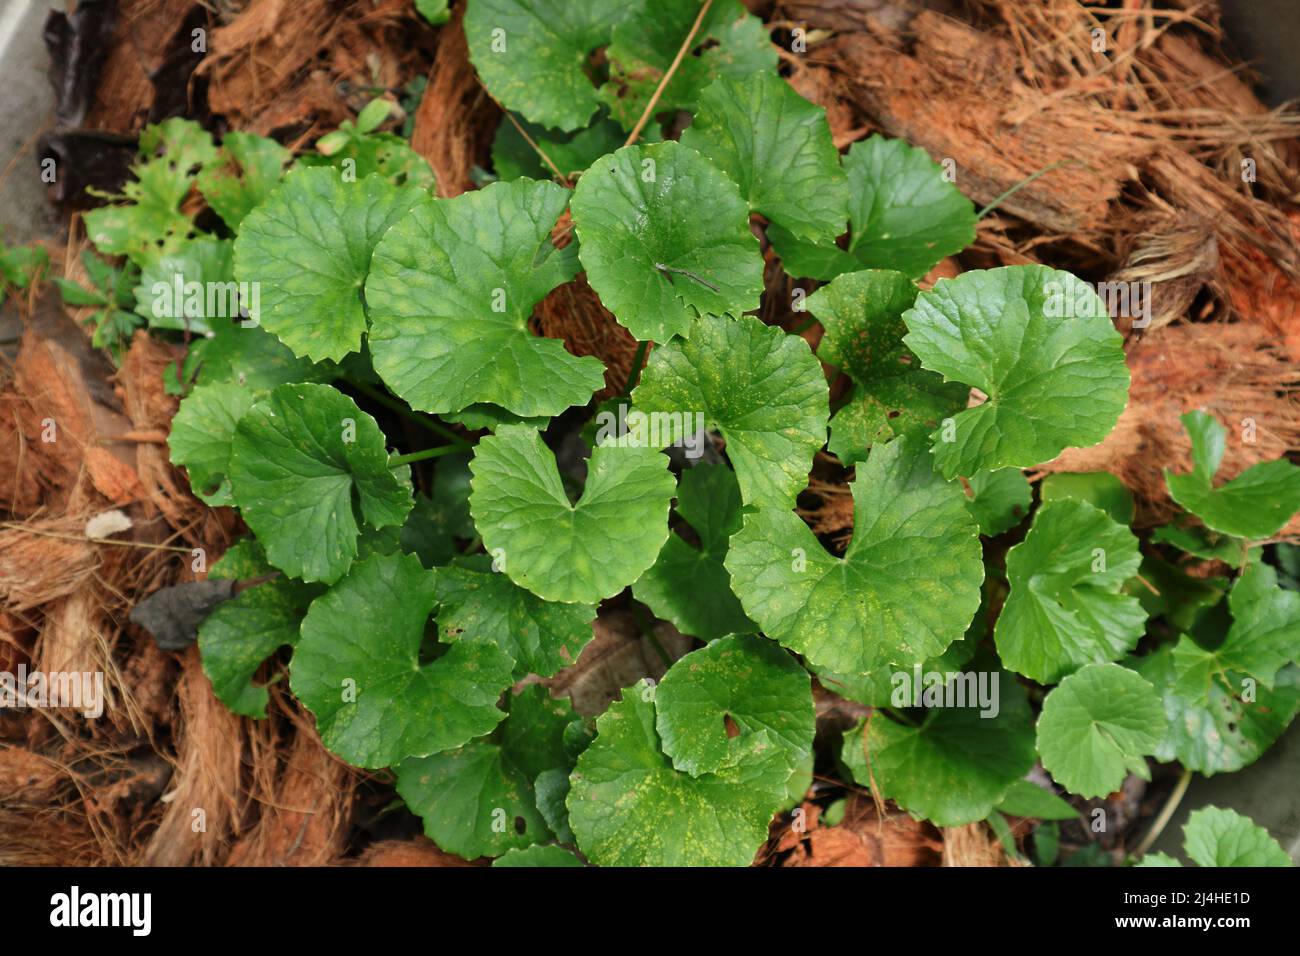 Overhead view of Centella asiatica plant in a pot with coconut husks around to protect from moisture Stock Photo